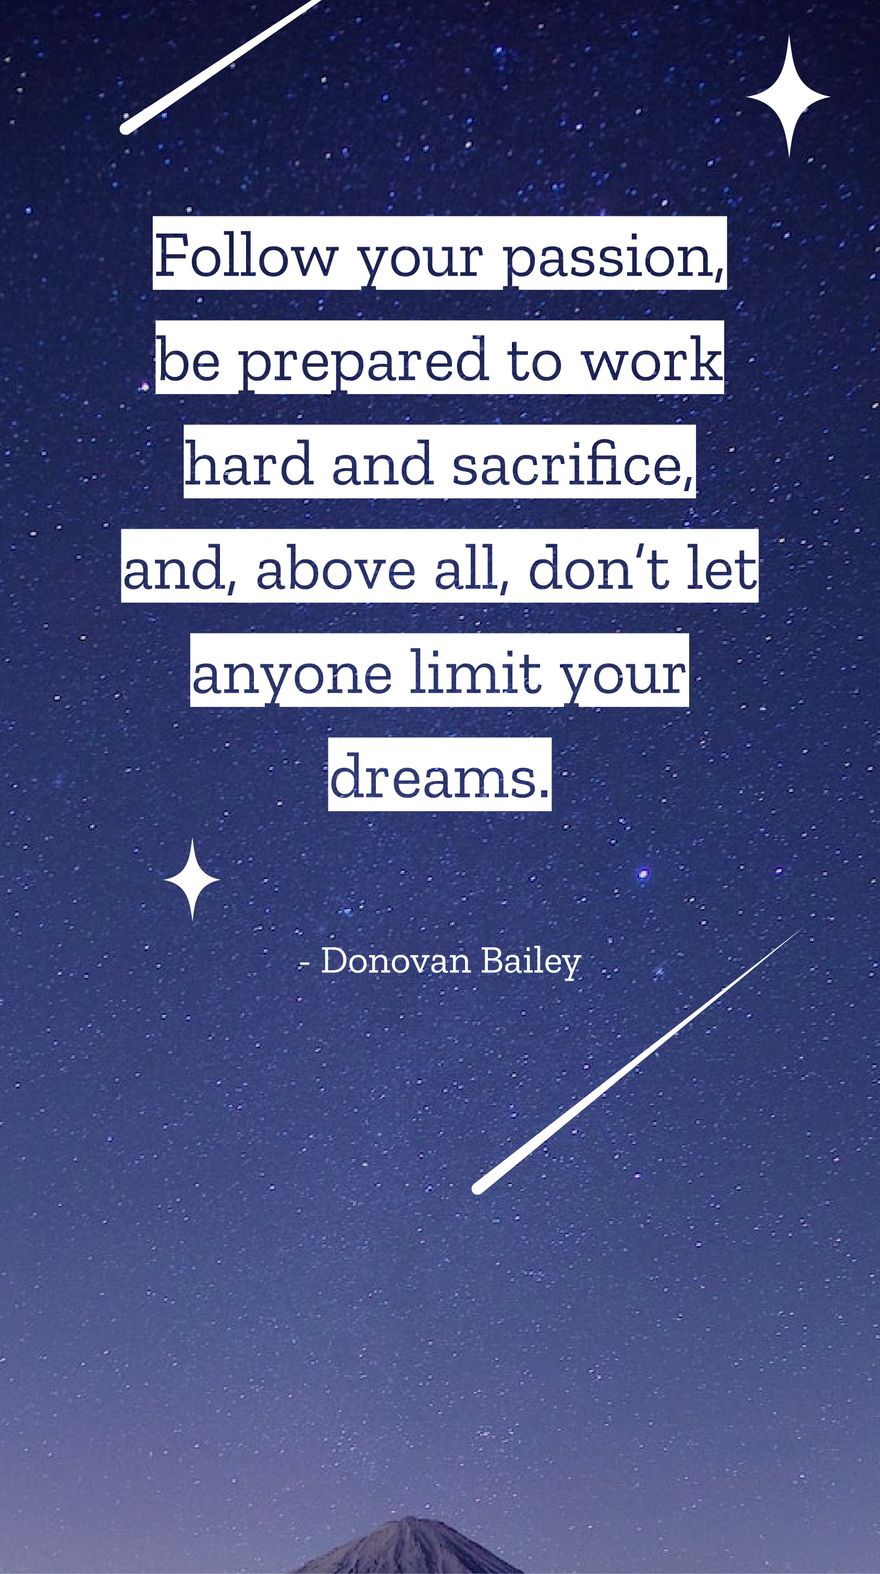 Free Donovan Bailey - Follow your passion, be prepared to work hard and sacrifice, and, above all, don’t let anyone limit your dreams.